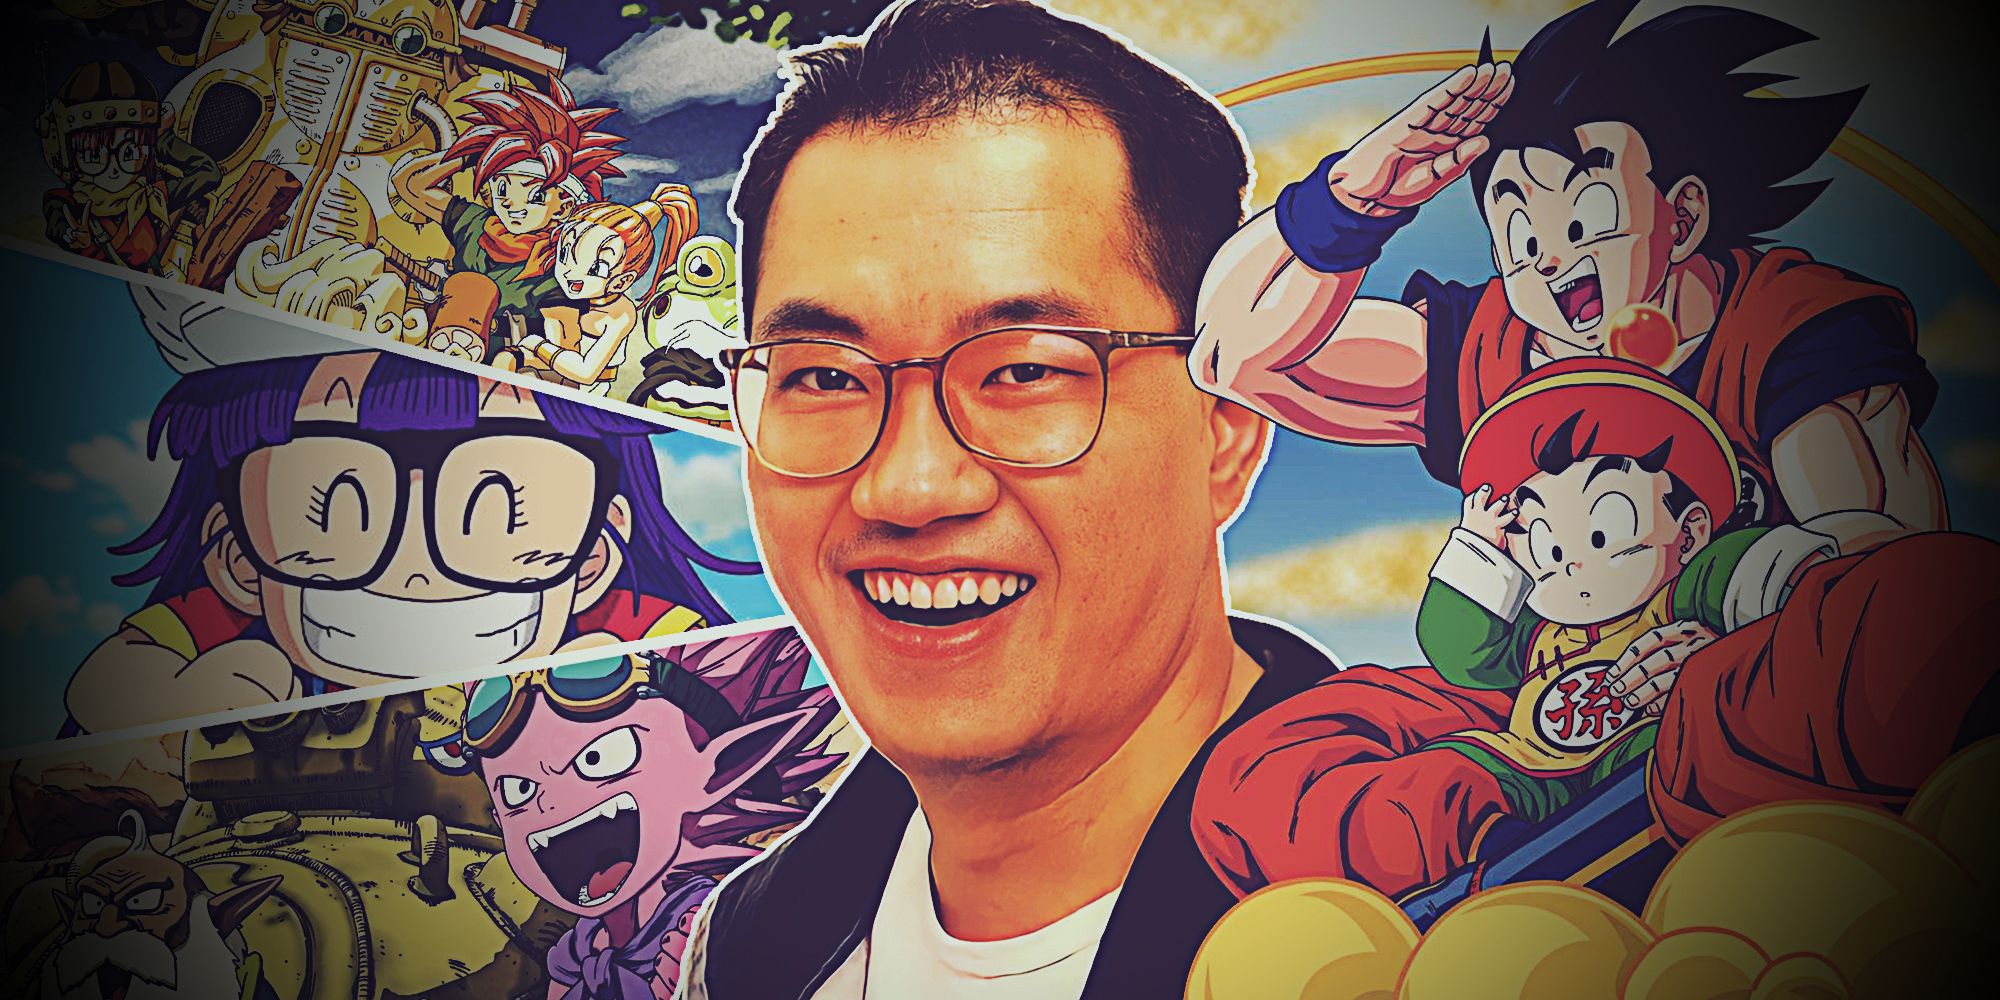 Akira Toriyama May Be Gone, But His Work Will Live On Forever